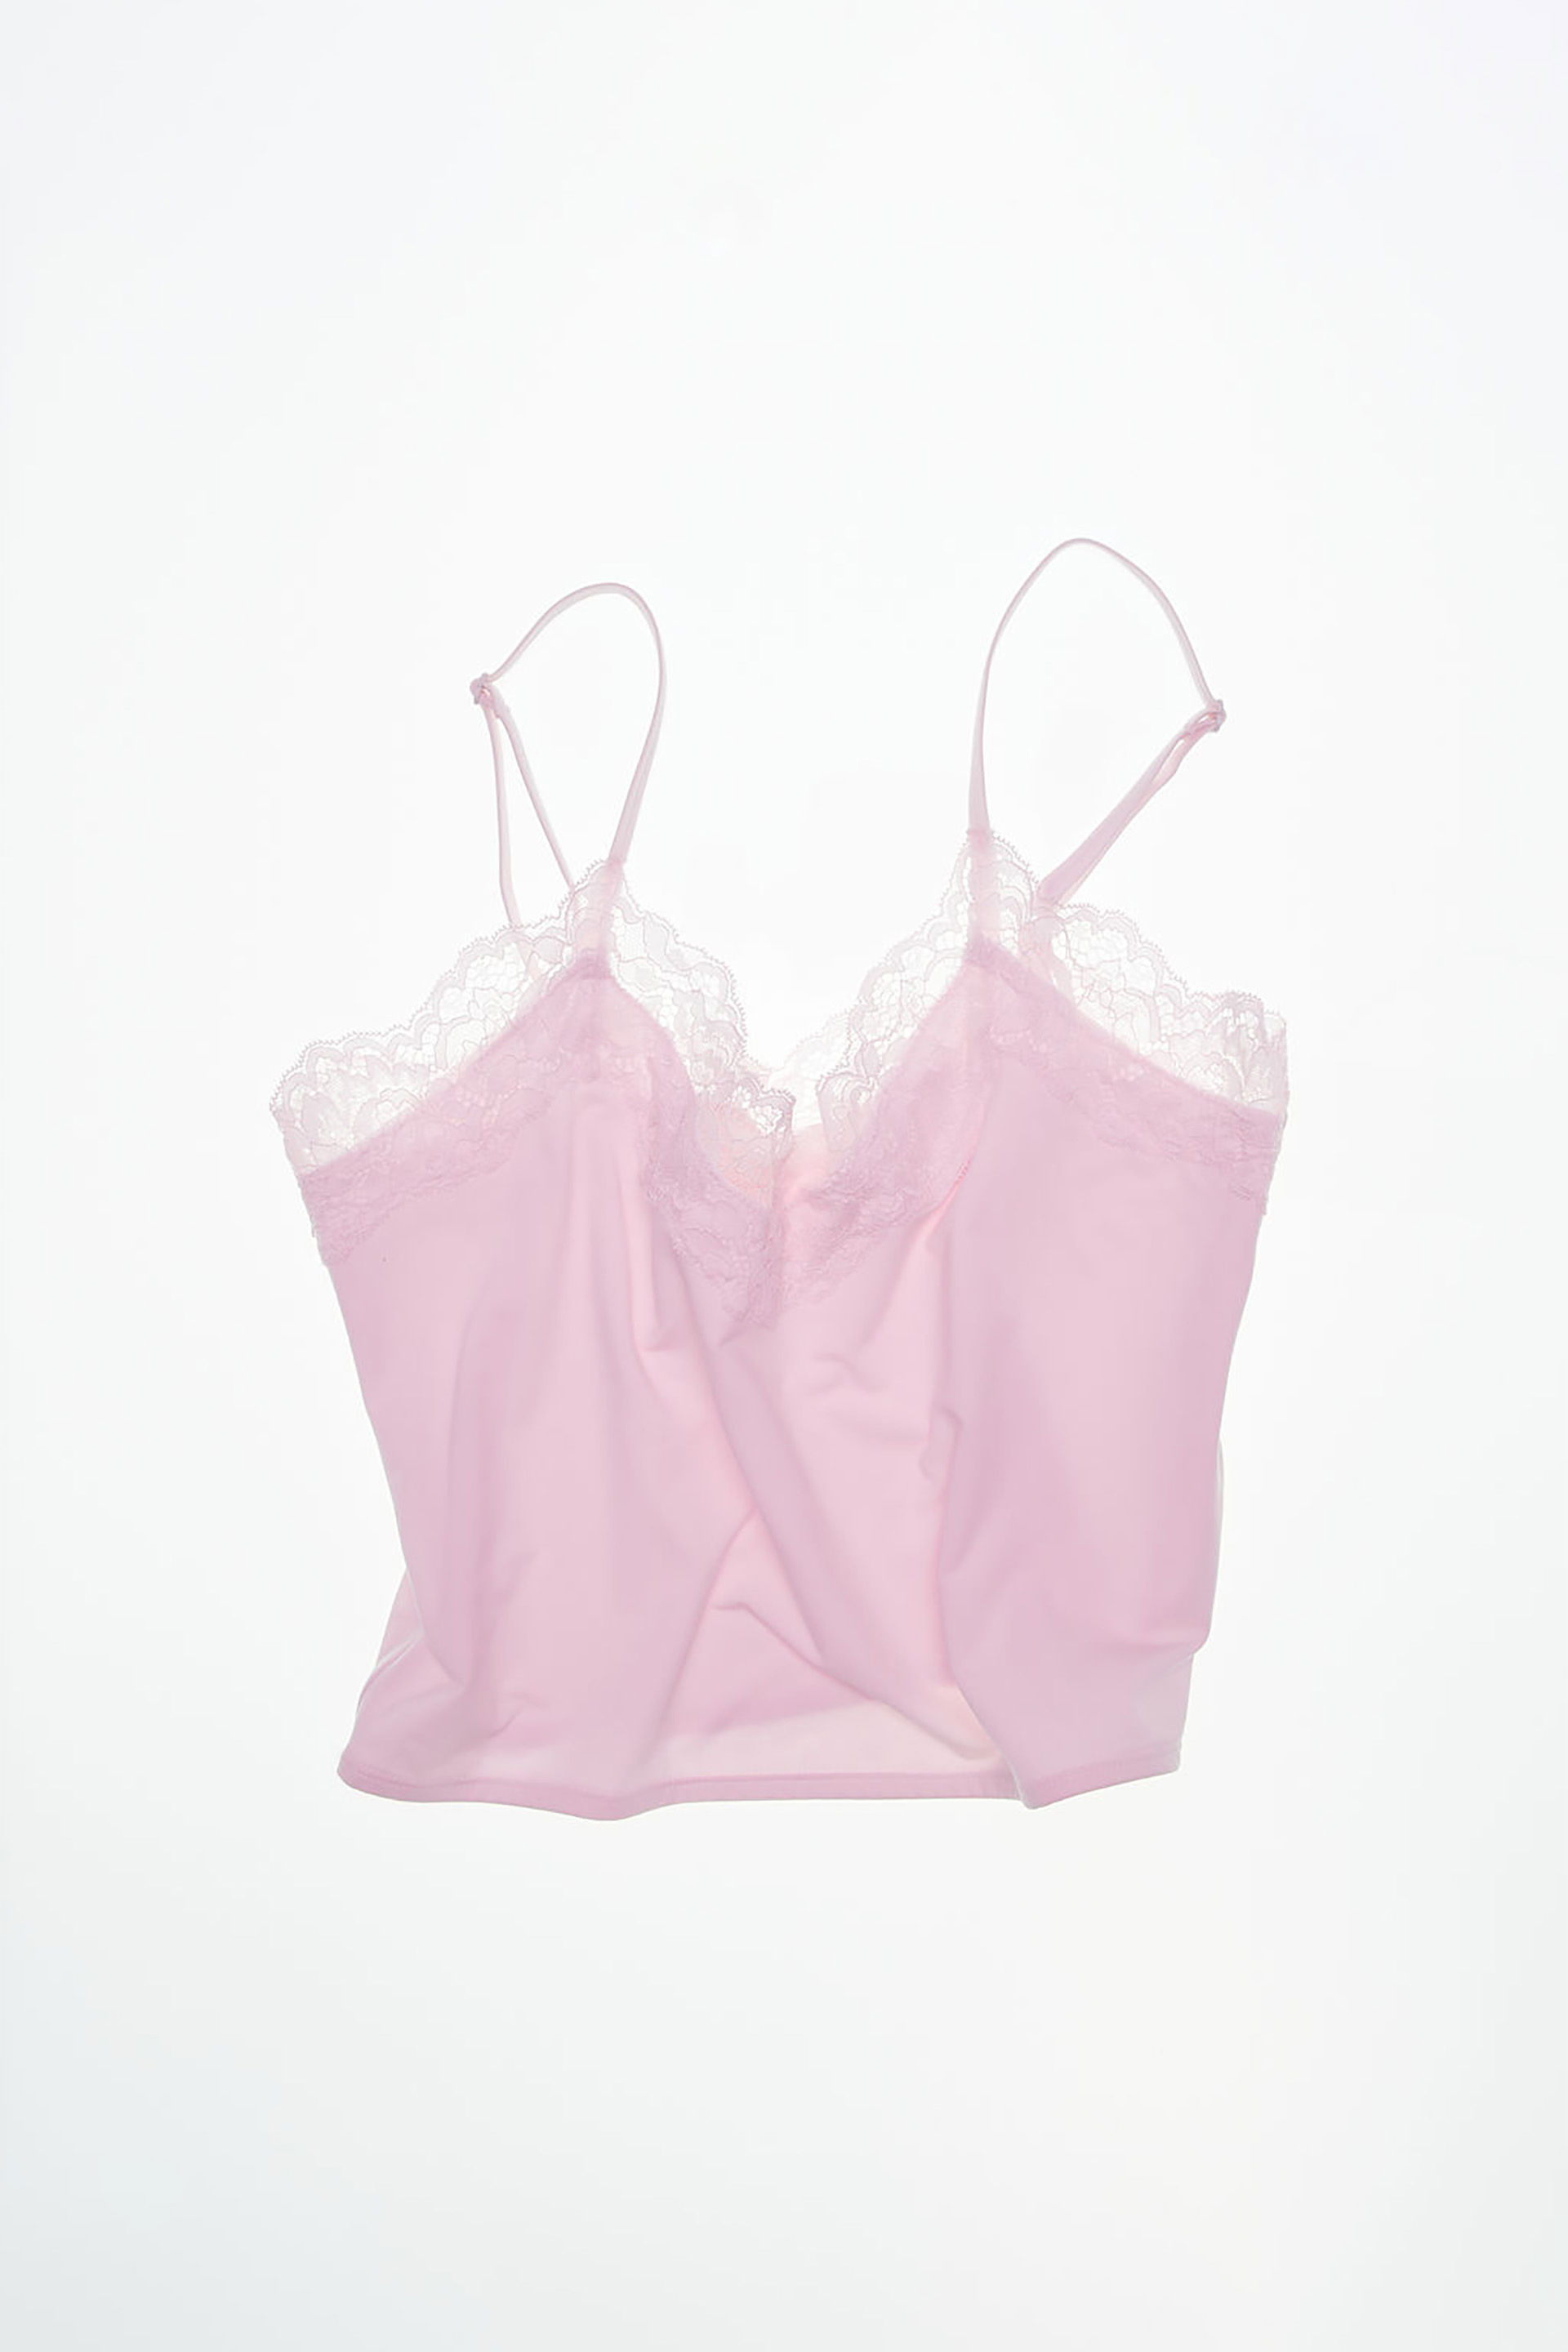 Body - Soft Lounge Lace Trim Cami - Tender touch pink